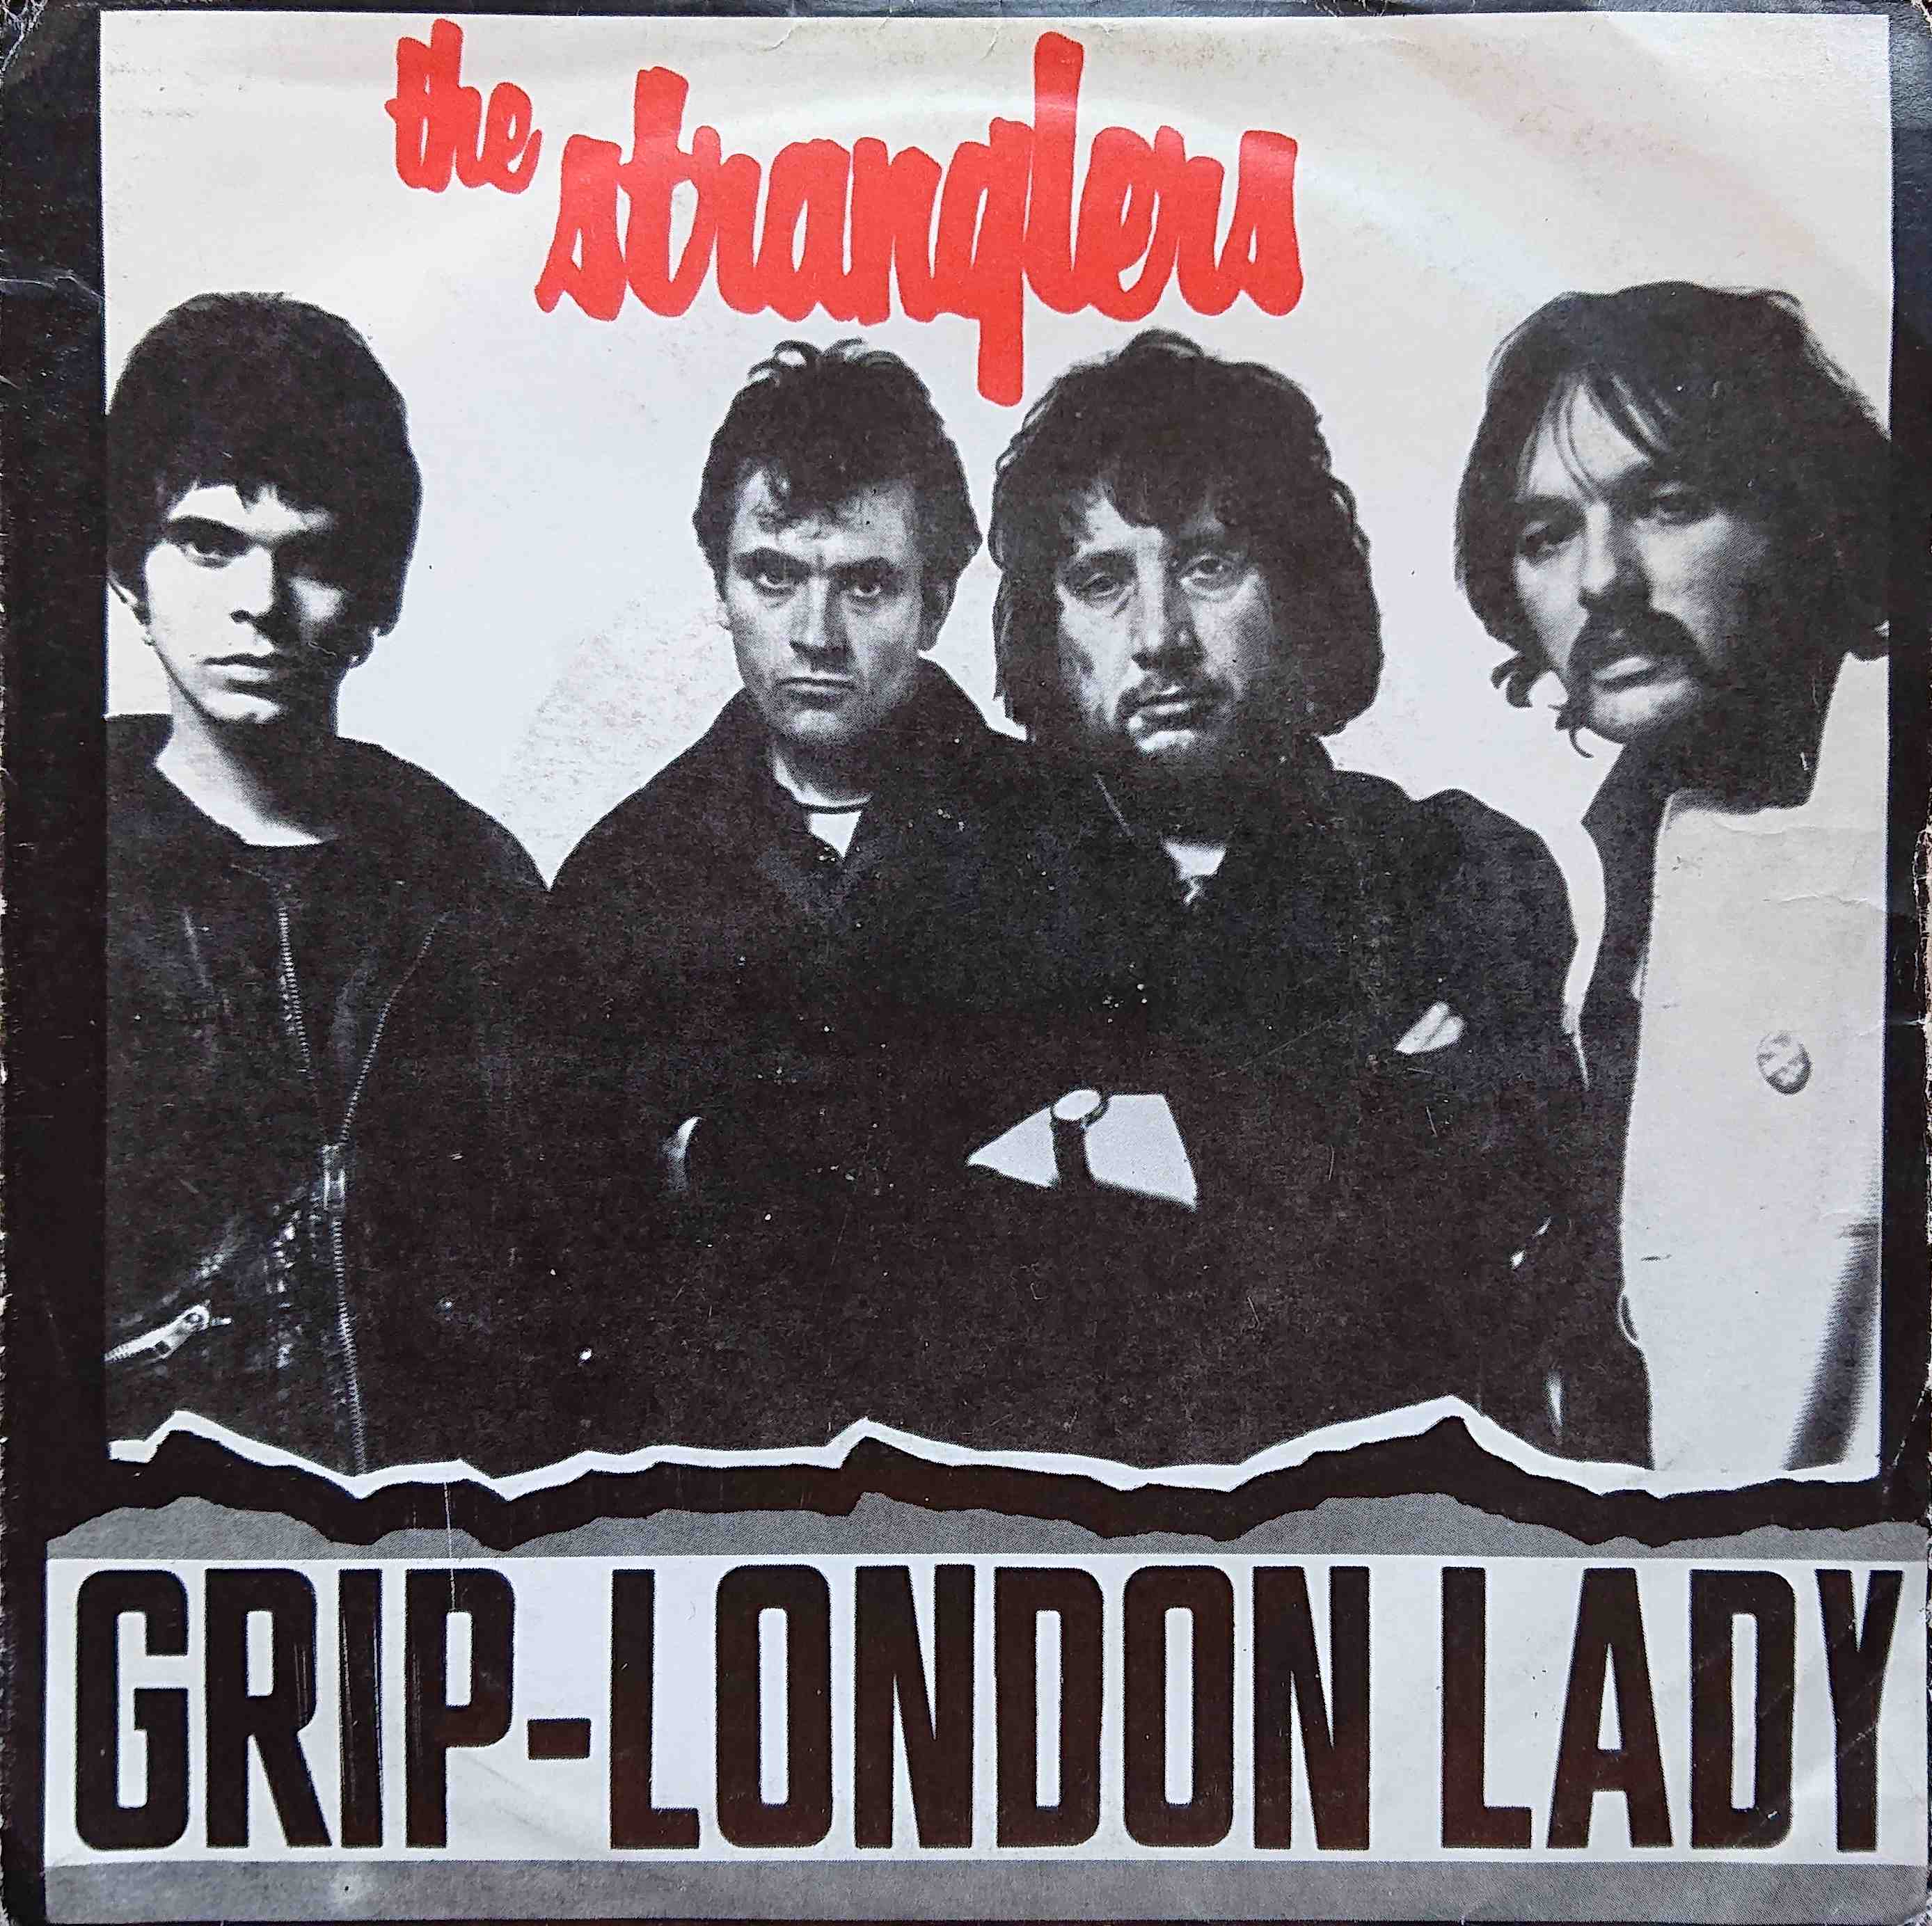 Picture of (Get a) Grip (On yourself) by artist The Stranglers from The Stranglers singles